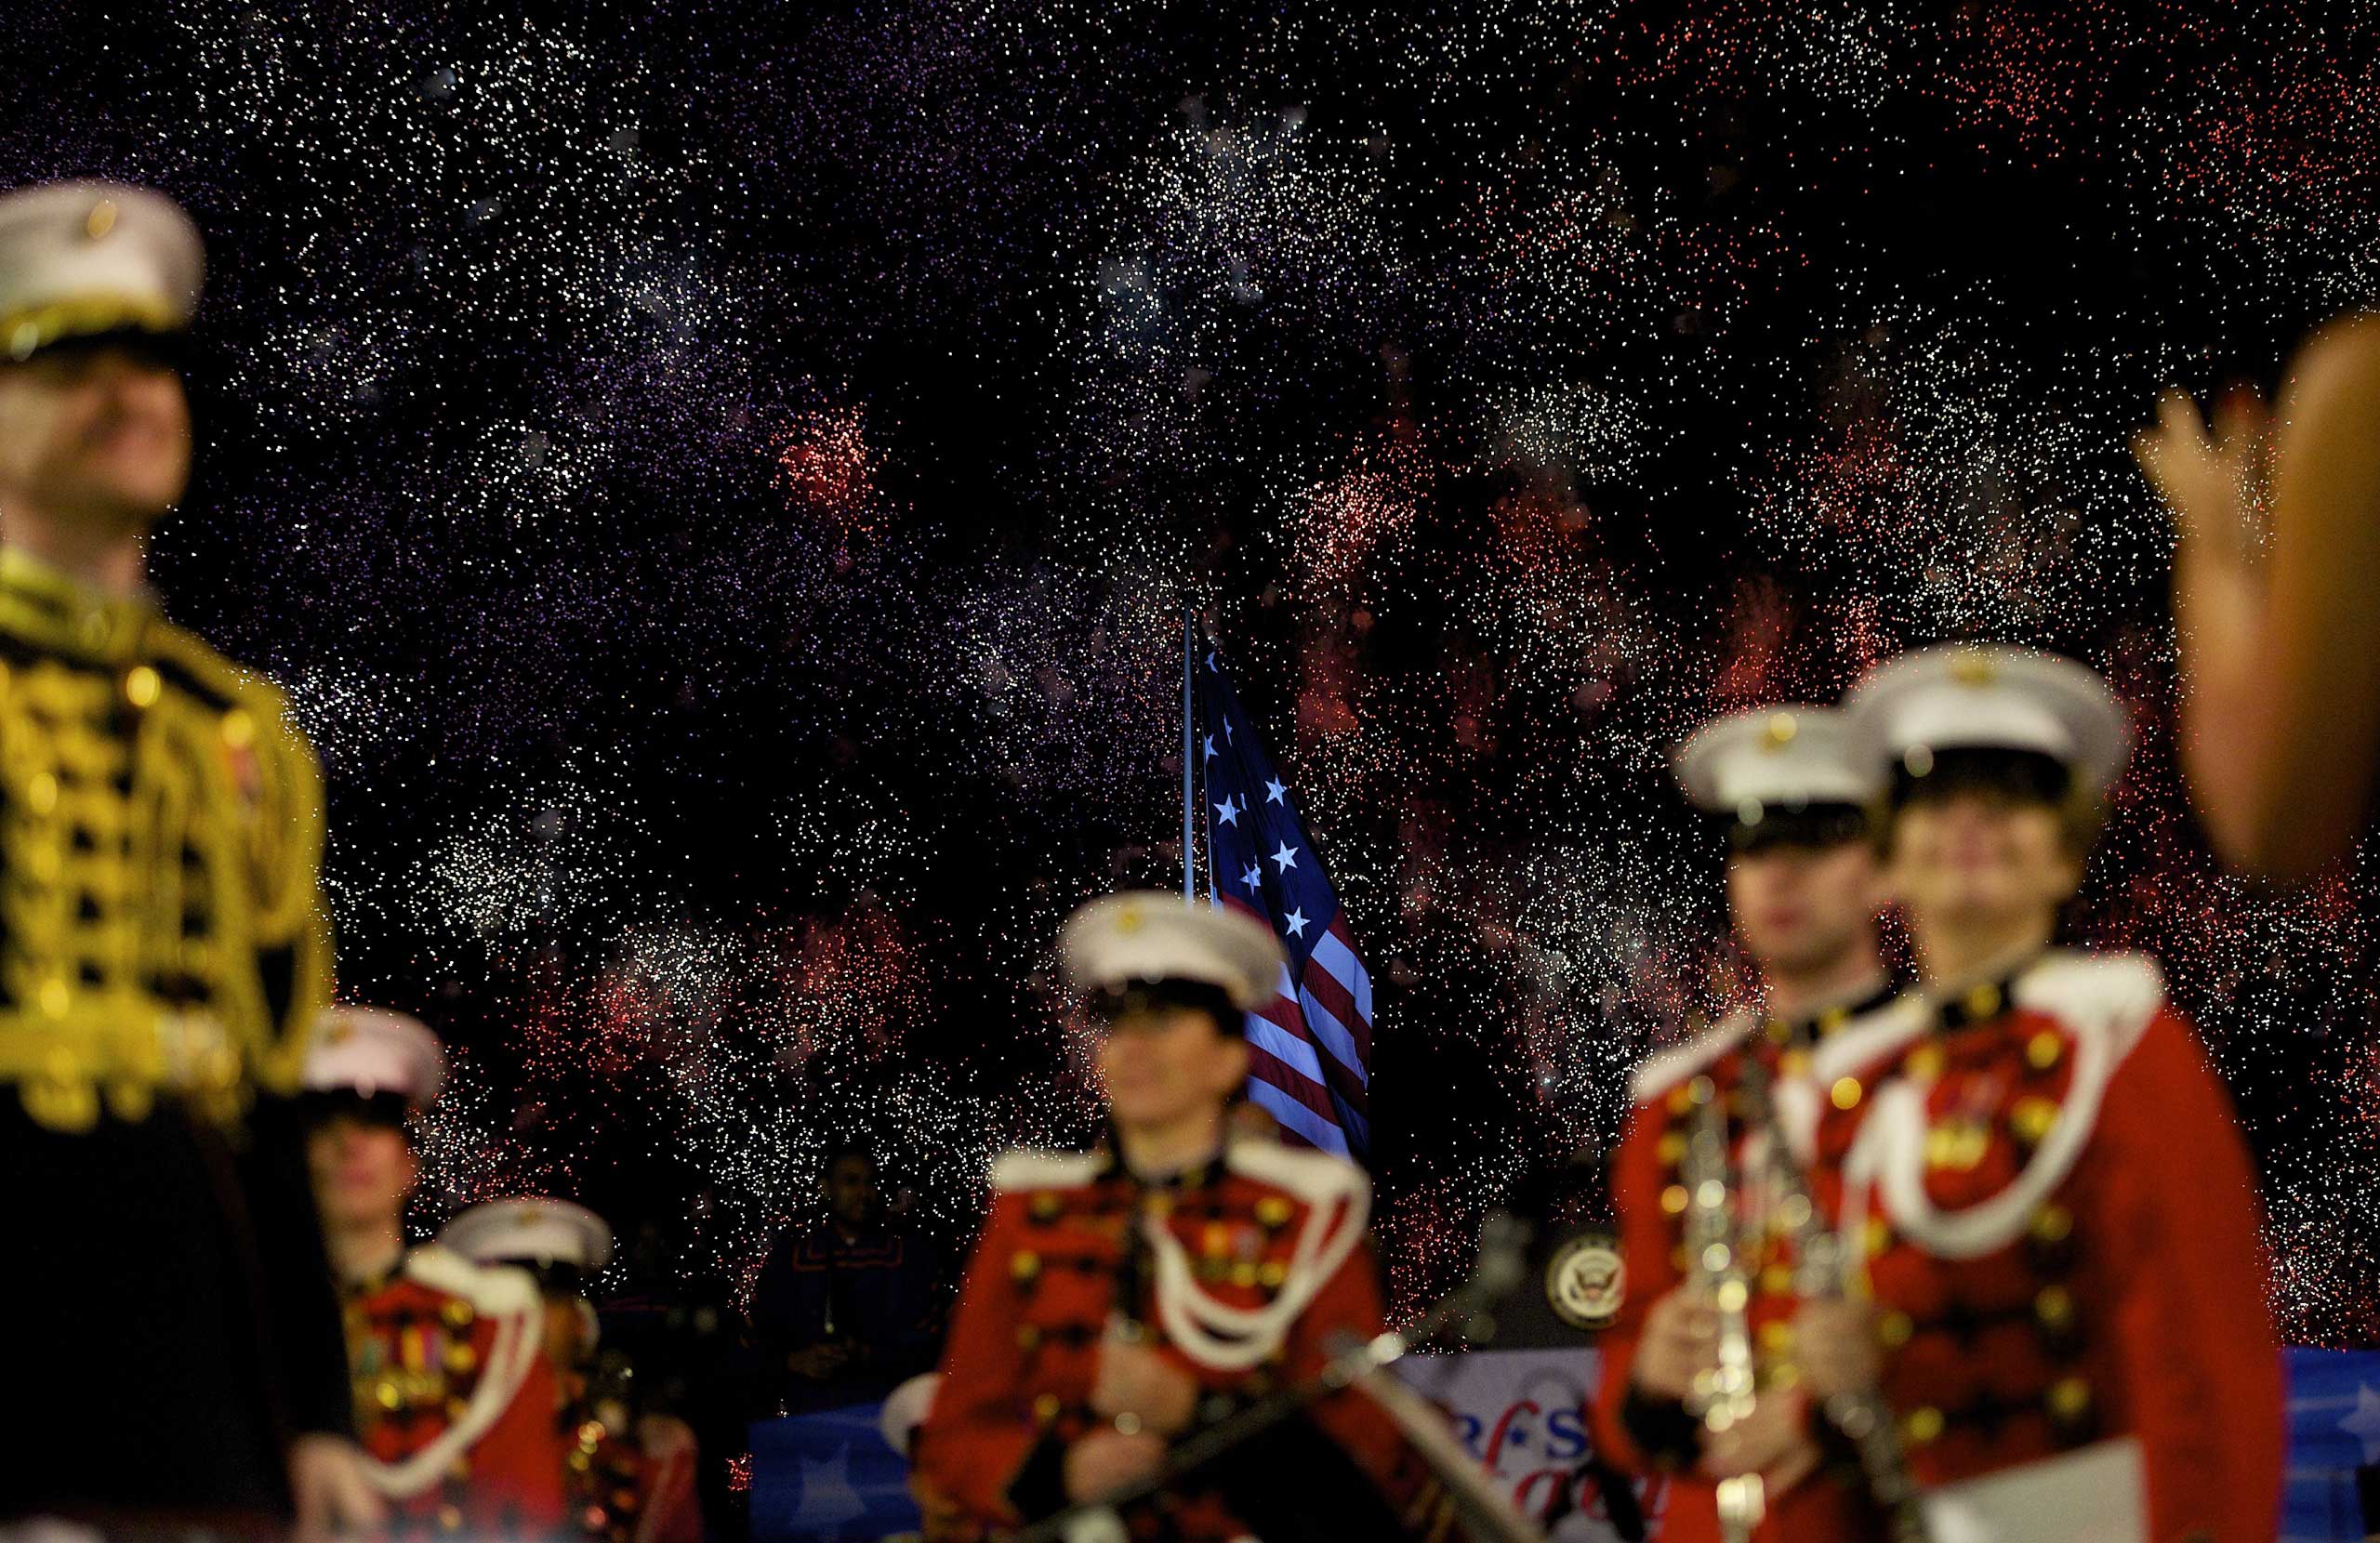 Sept. 13, 2014.  Members of the President's Own Marine Band stand during a fireworks display commemorating the bicentennial of the writing of The Star-Spangled Banner at Fort McHenry, Baltimore, Md.